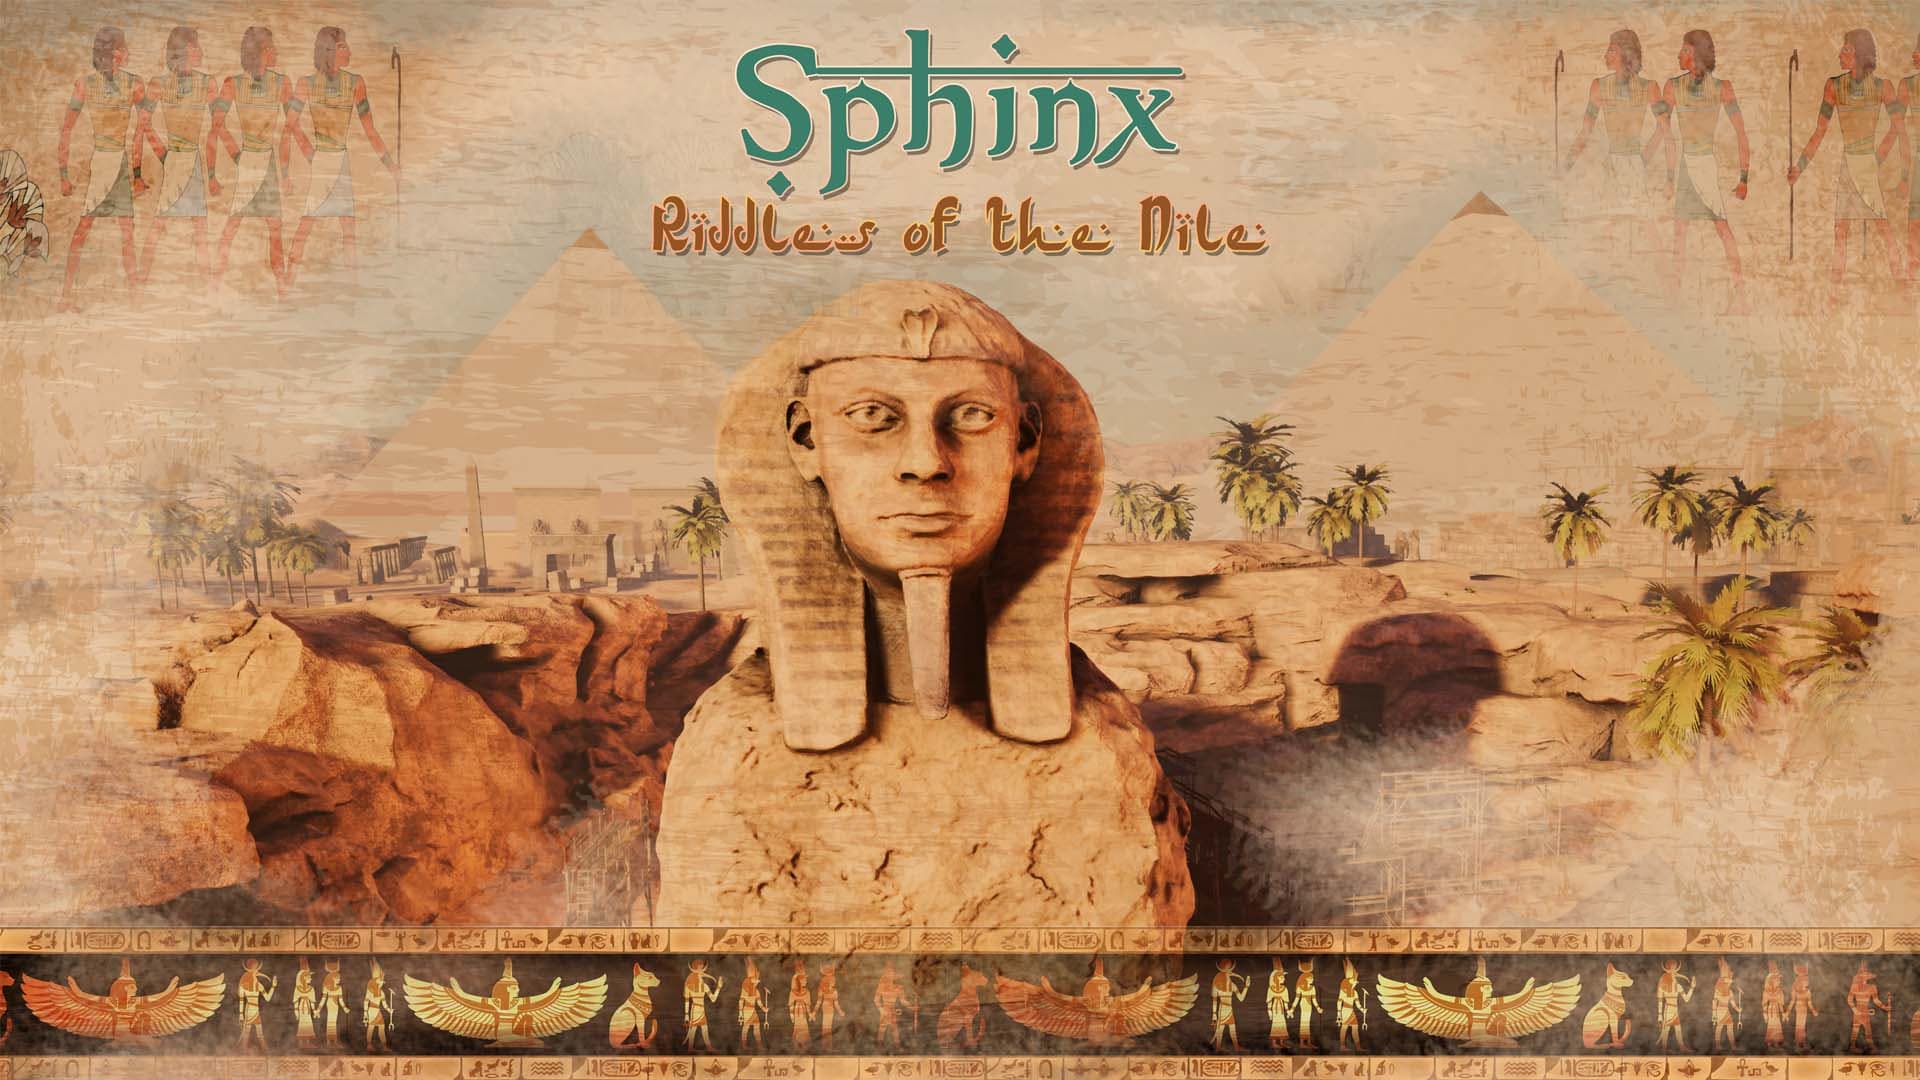 Sphinx - Riddles of the Nile